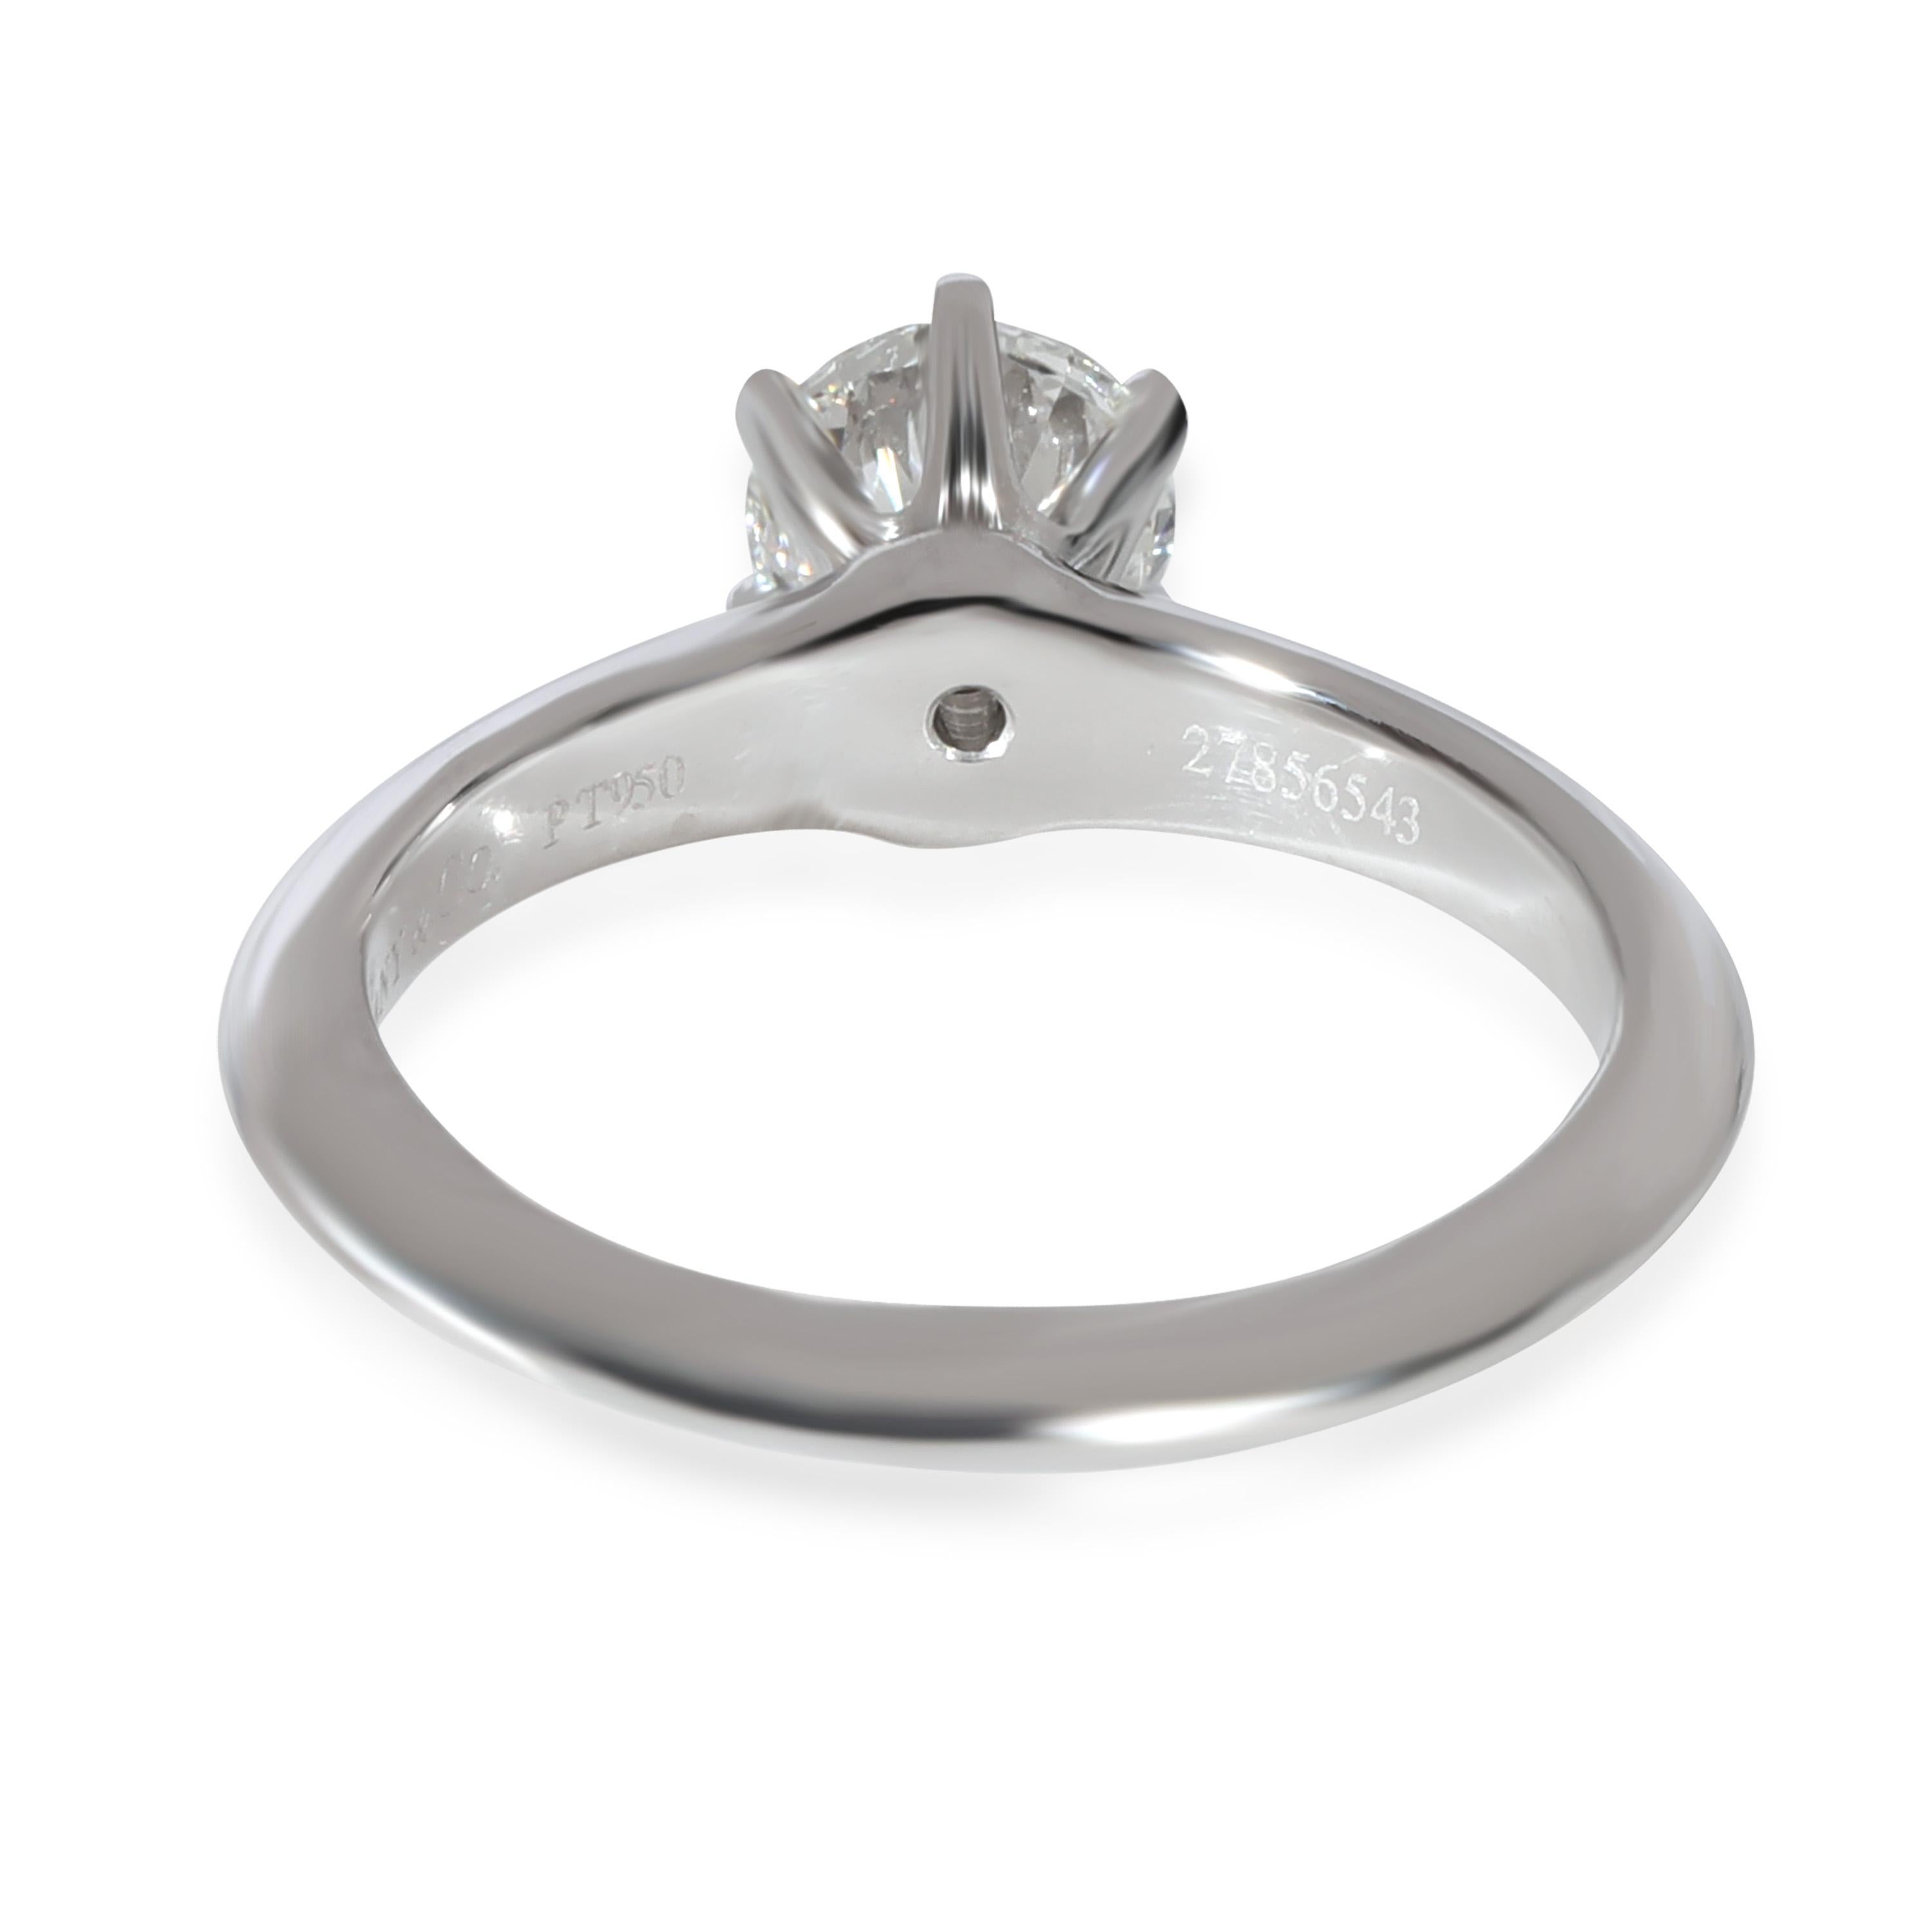 Tiffany & Co. Solitaire Diamond Engagement Ring in Platinum F VS2 0.93 CTW

PRIMARY DETAILS
SKU: 129843
Listing Title: Tiffany & Co. Solitaire Diamond Engagement Ring in Platinum F VS2 0.93 CTW
Condition Description: Retails for 14550 USD. In